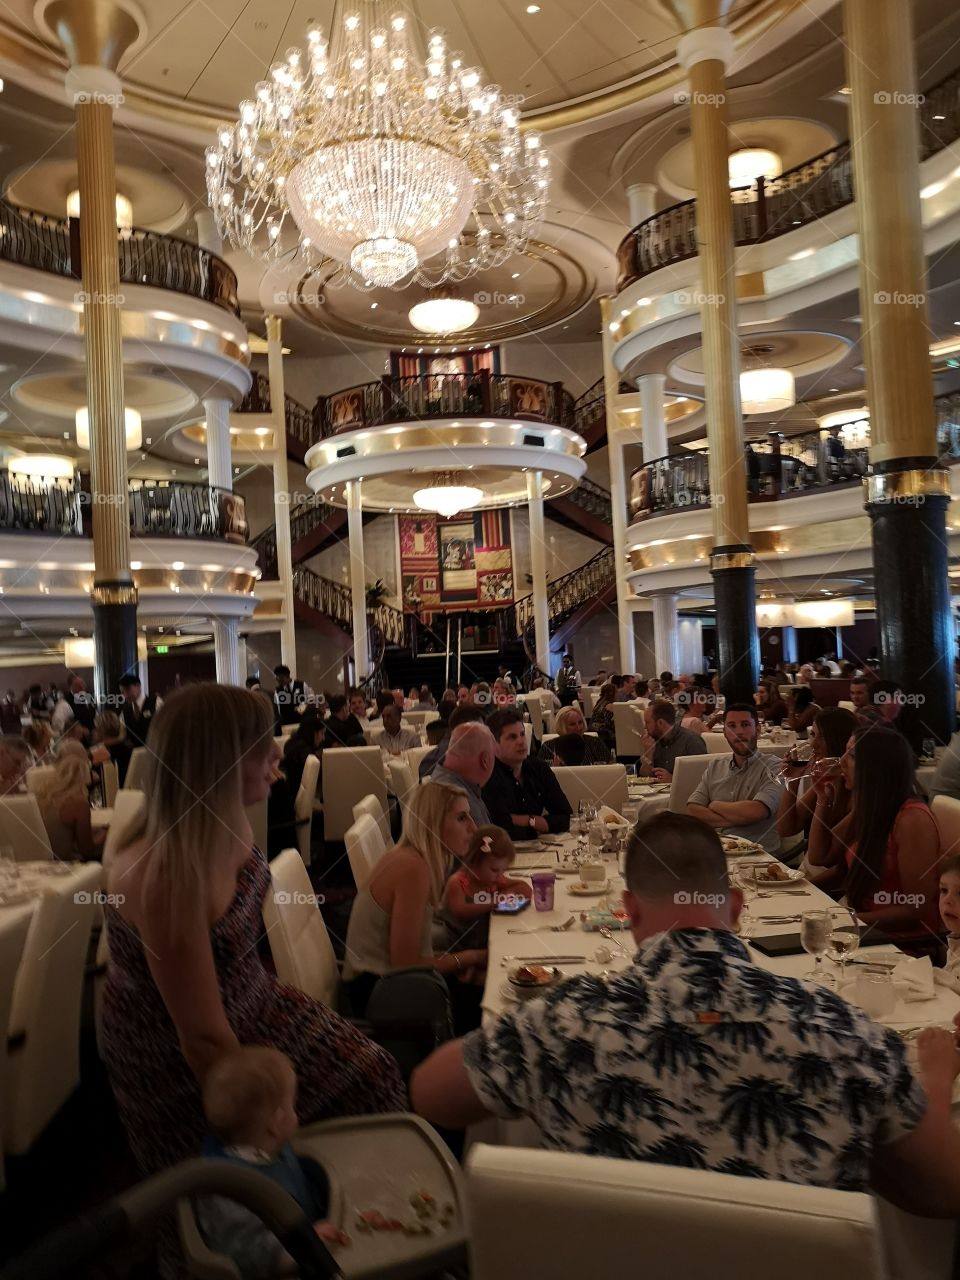 Dining Room on board Independence of the seas.